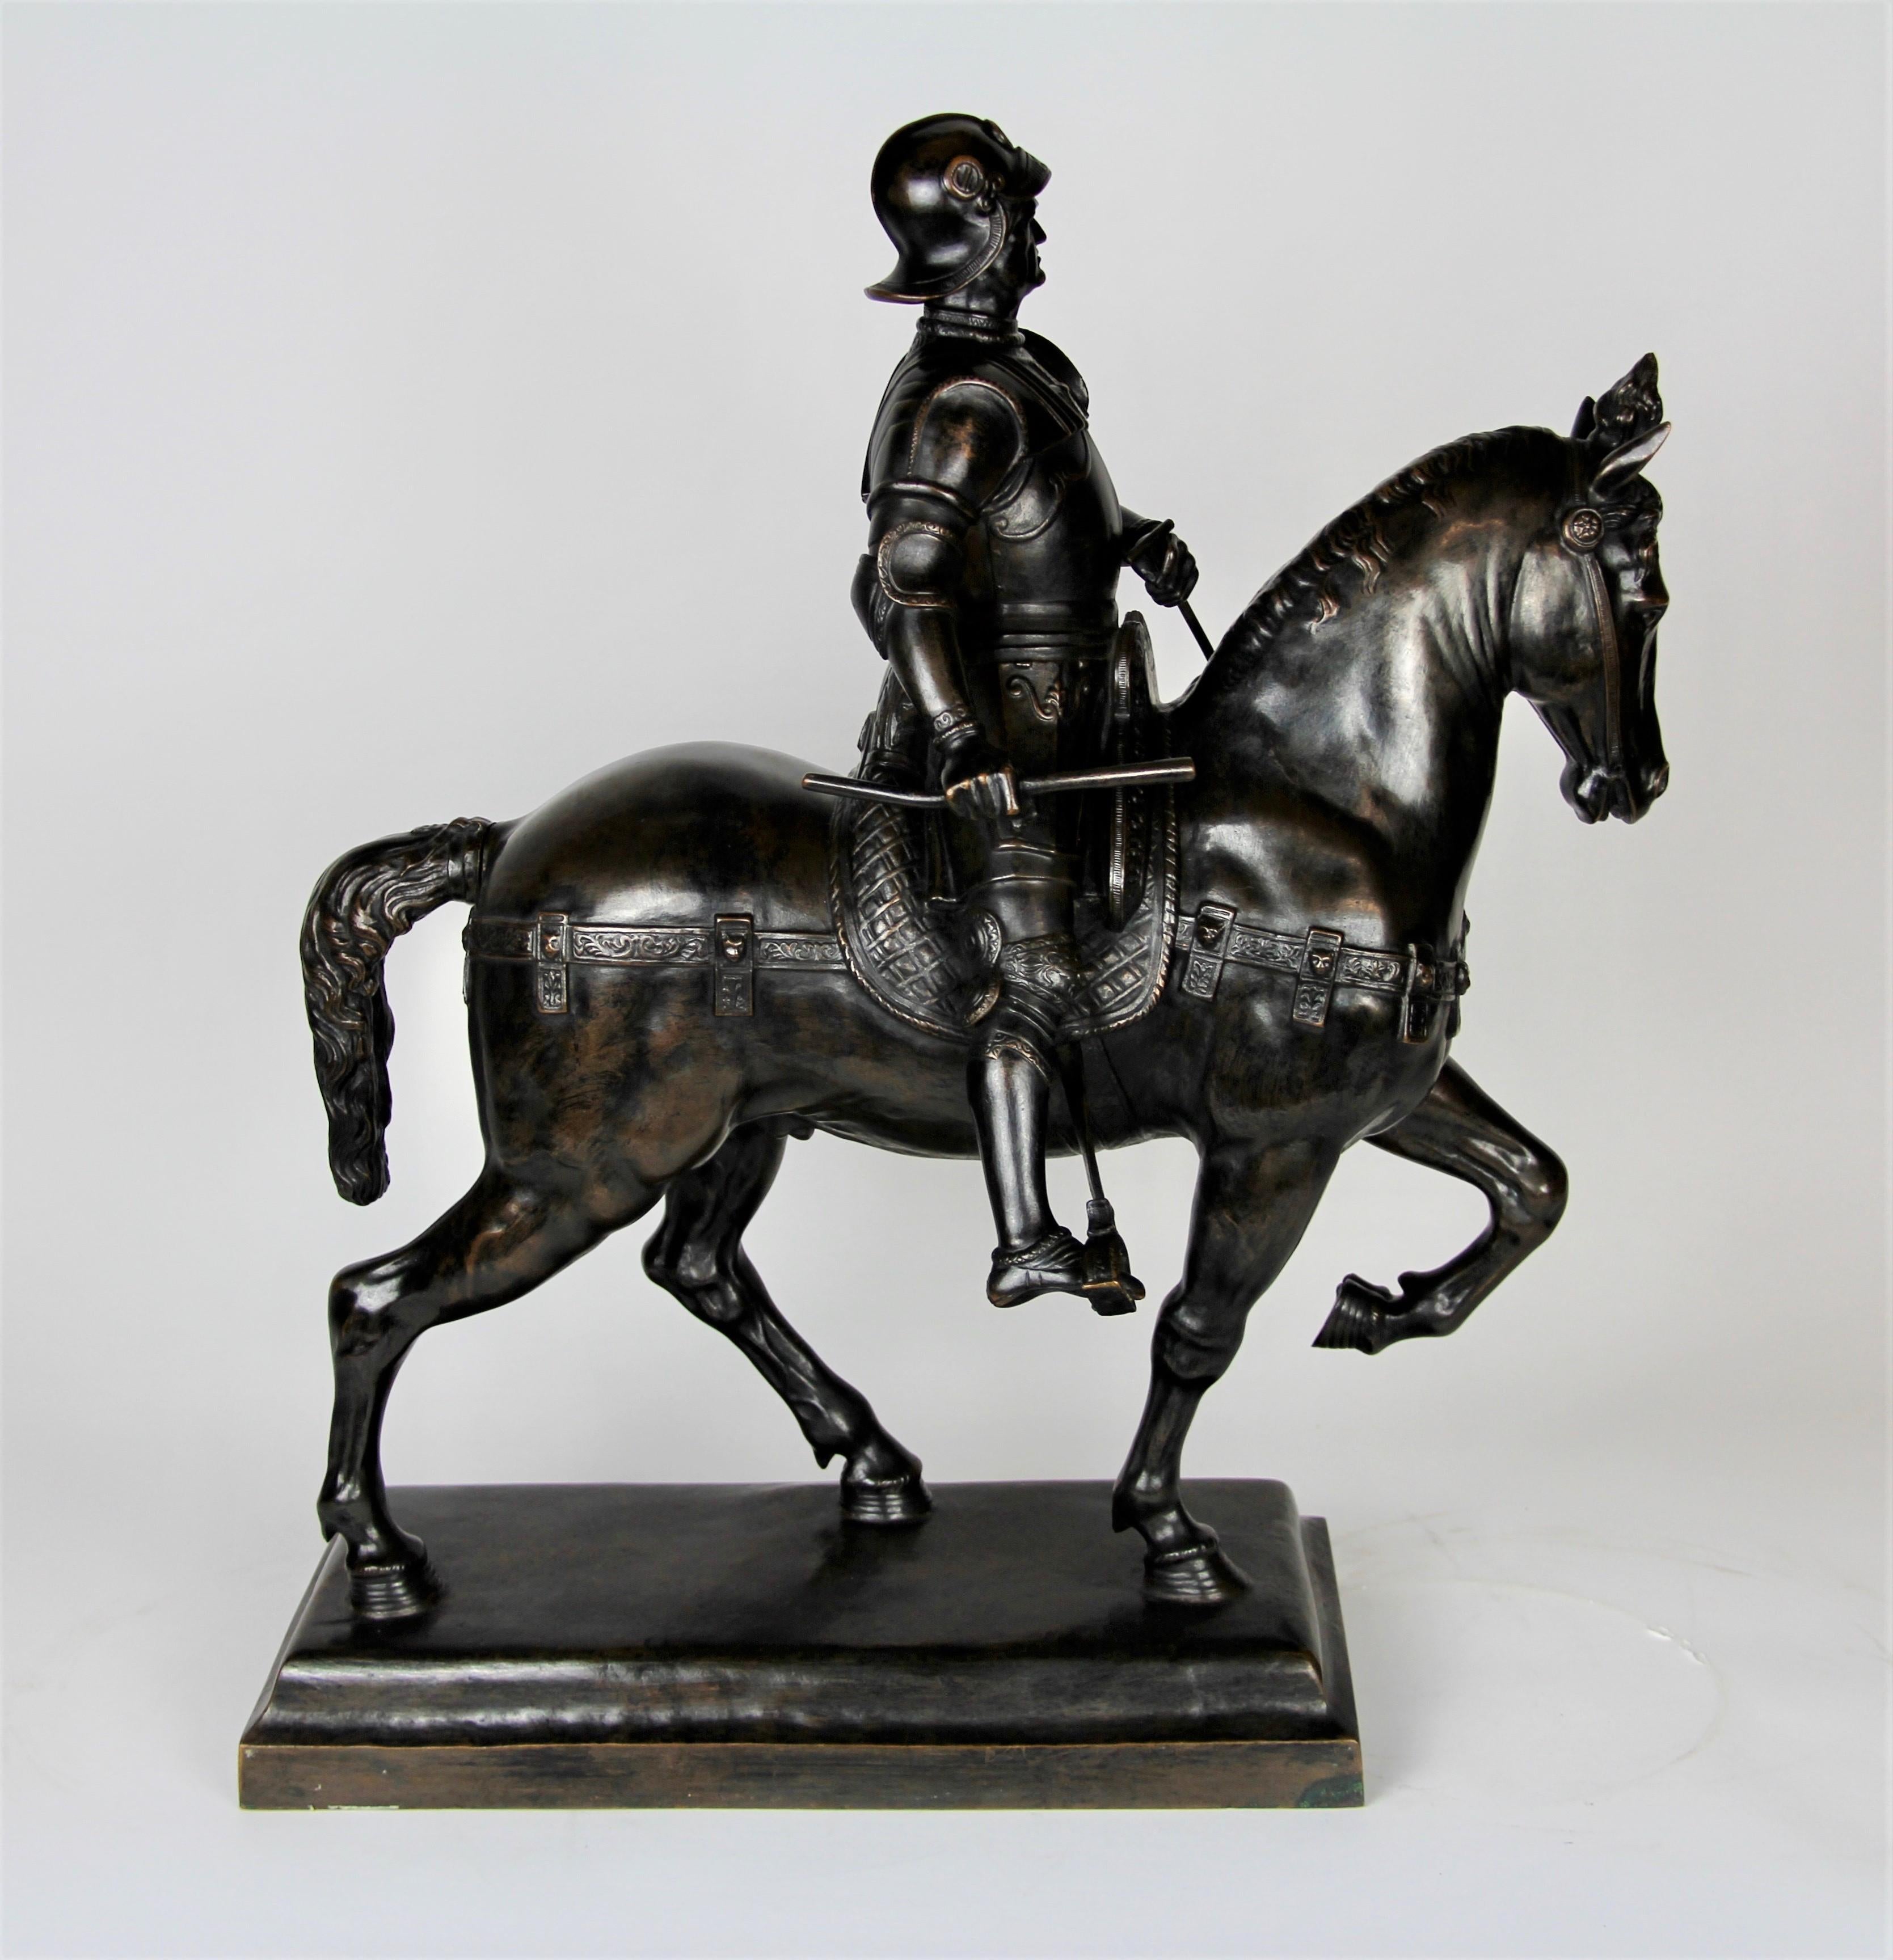 A Fabulous and Large Patinated Bronze Figure of a Soldier on a Horse. Beautifully cast and well patinated with a dark brown patina. The soldier is seen seated on a horse, beautifully modelled and hand chisseled details. Marked and signed on the